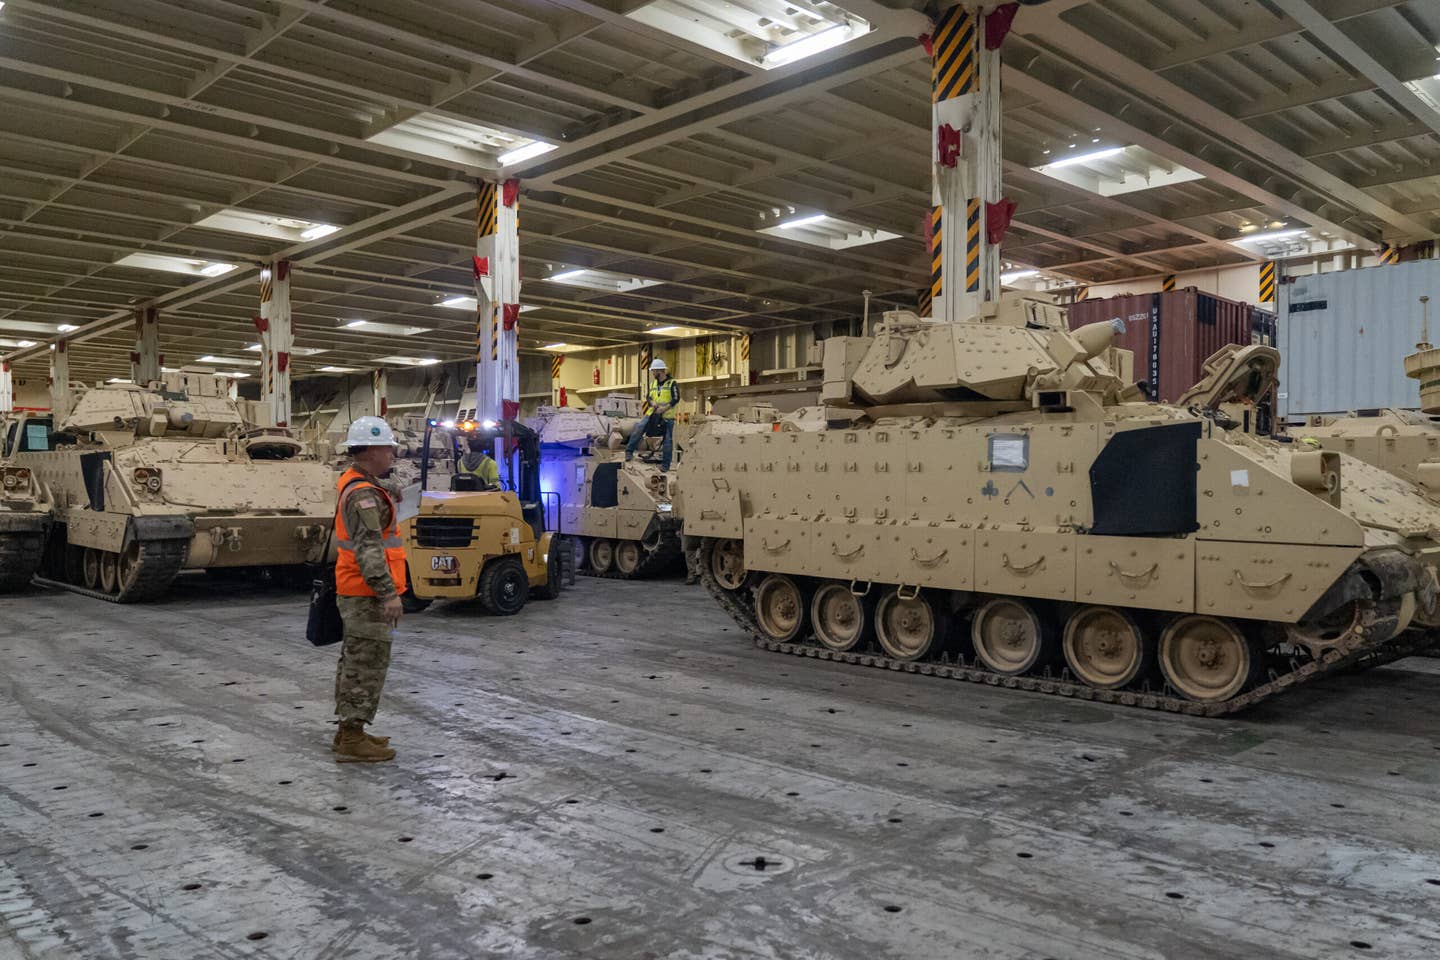 Army Sgt. Ryan Townsend, 841st Transportation Battalion operations hatch foreman, inspects Bradley Fighting Vehicles as they are parked within the ARC Integrity, Jan. 25. (U.S. Transportation Command photo by Oz Suguitan)